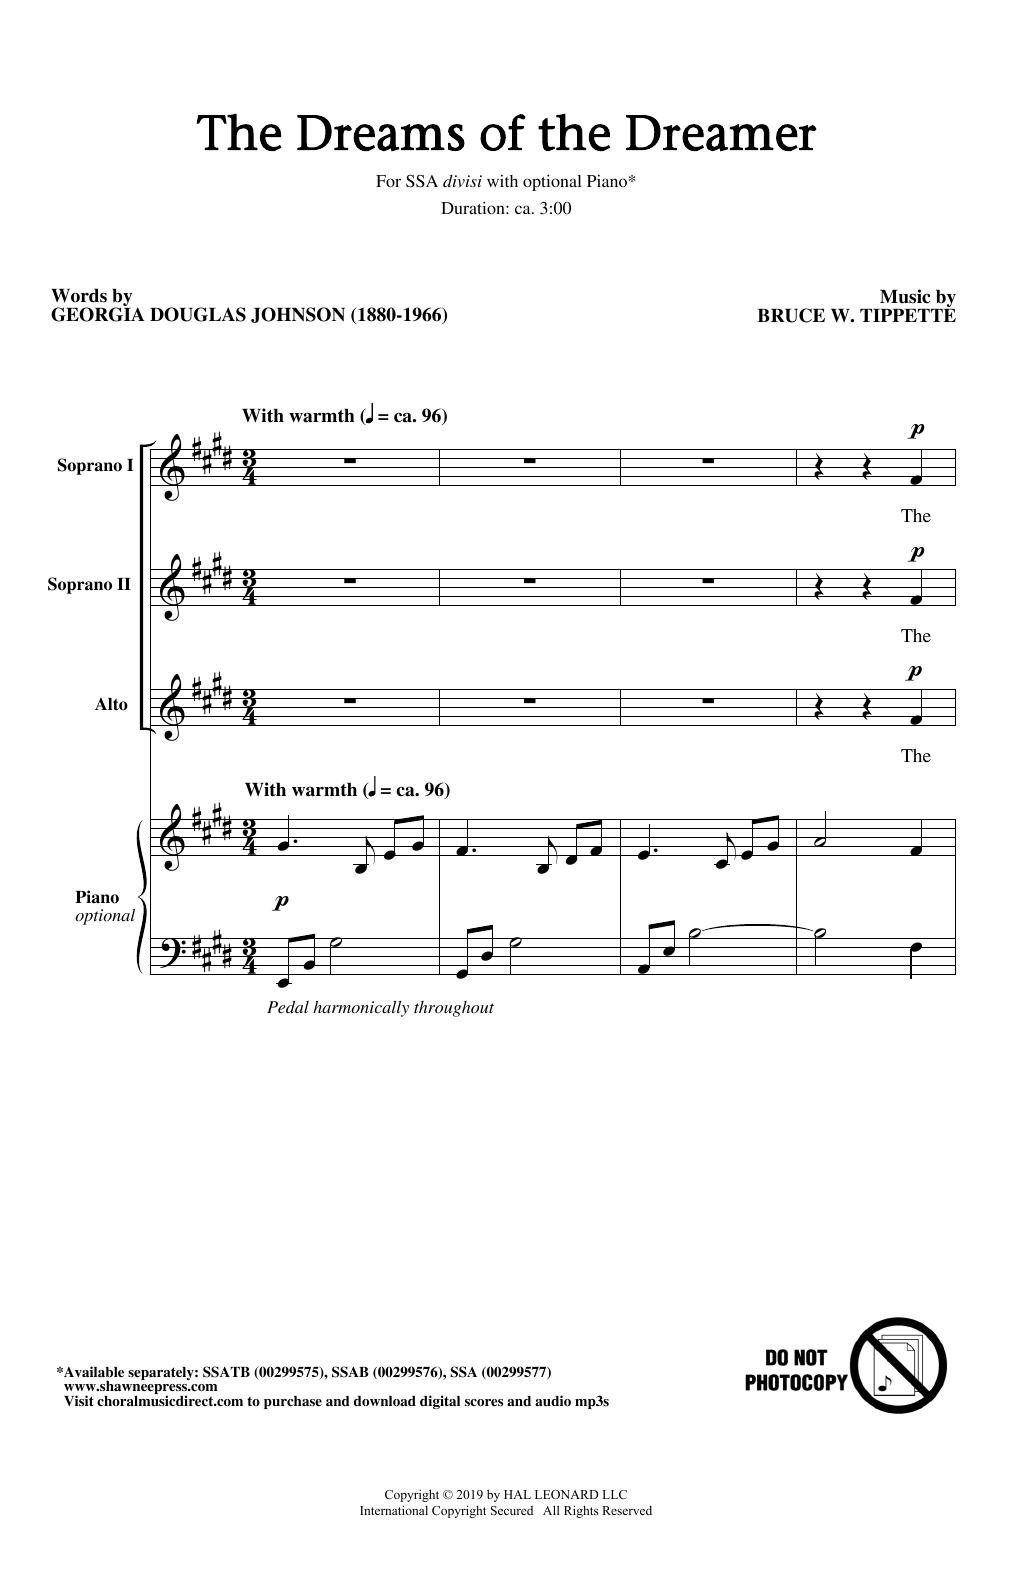 Download Georgia Douglas Johnson and Bruce W. The Dreams Of The Dreamer Sheet Music